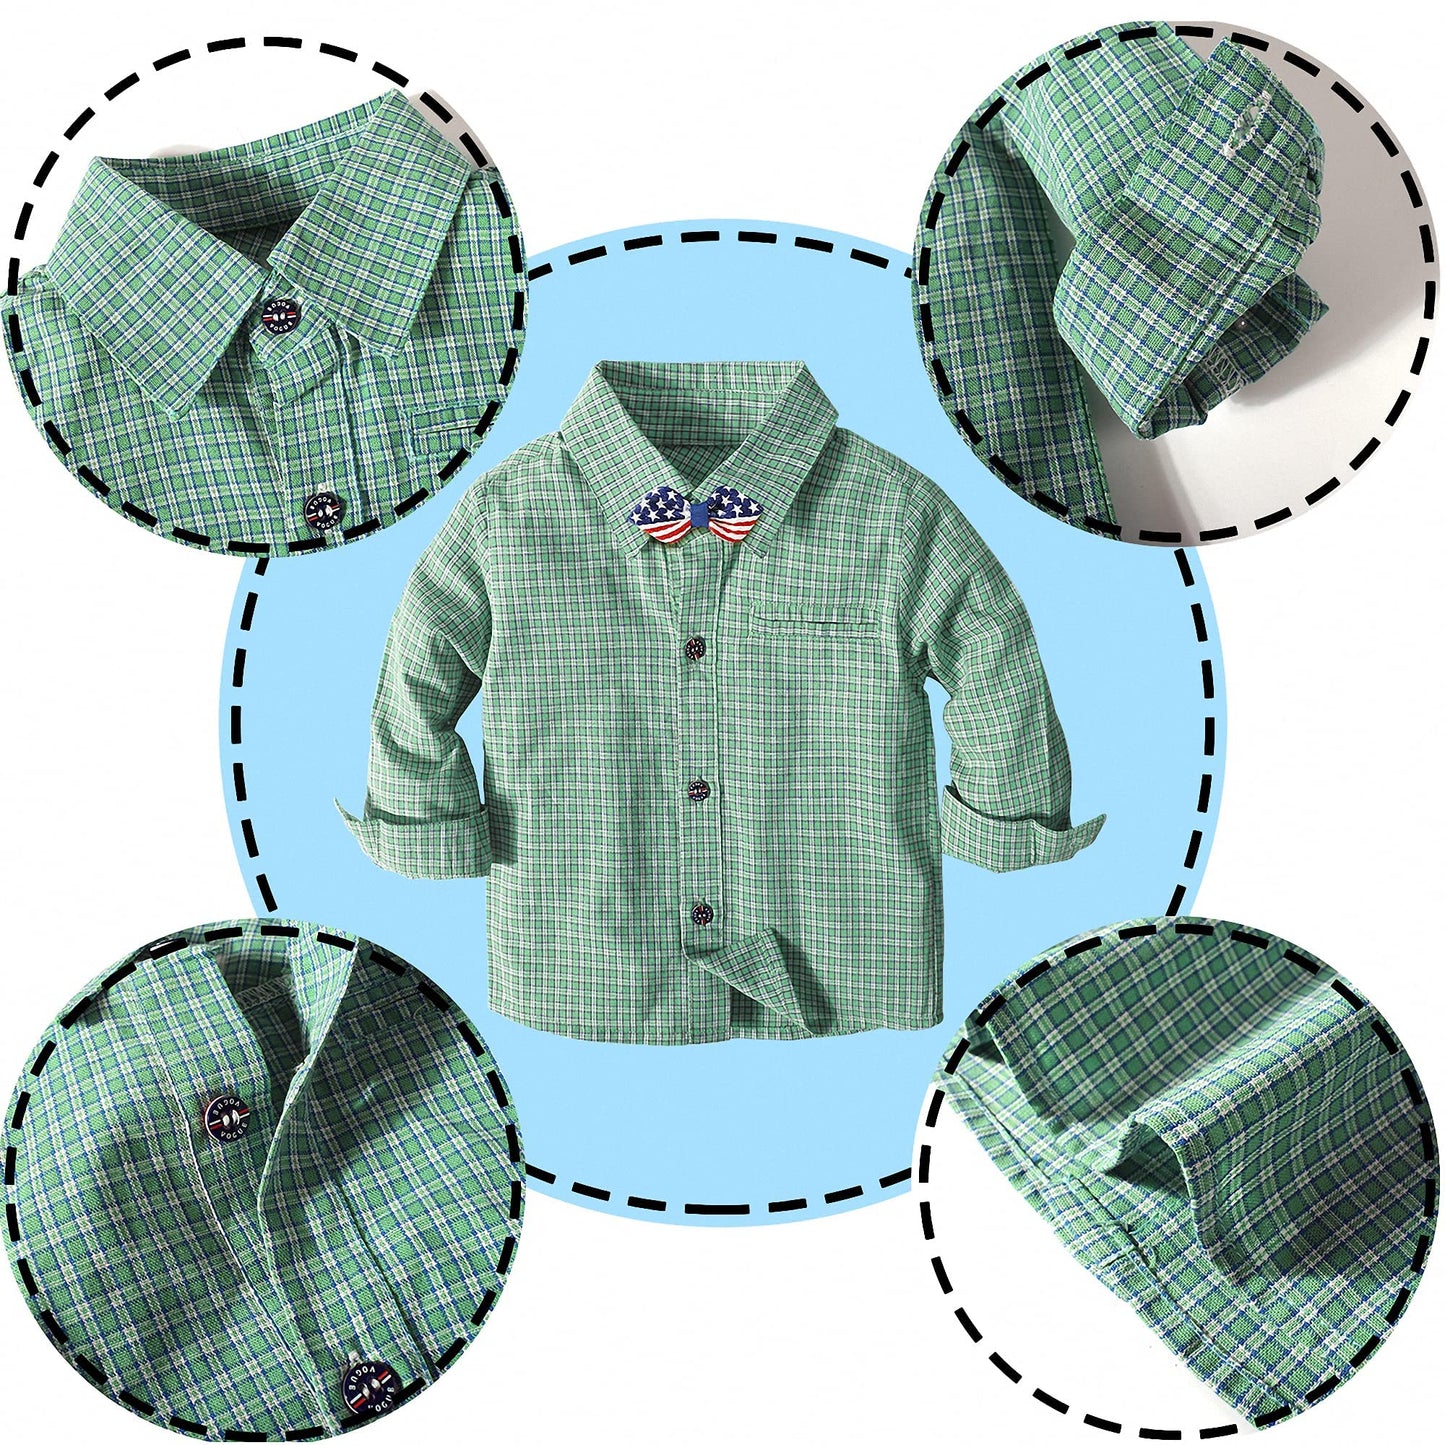 Nwada Boys Clothes Sets Toddler Dress Suit Infant Outfit Gentlemans Clothes Sets Shirt + Pants + Bow Tie 12 Month - 6 Years